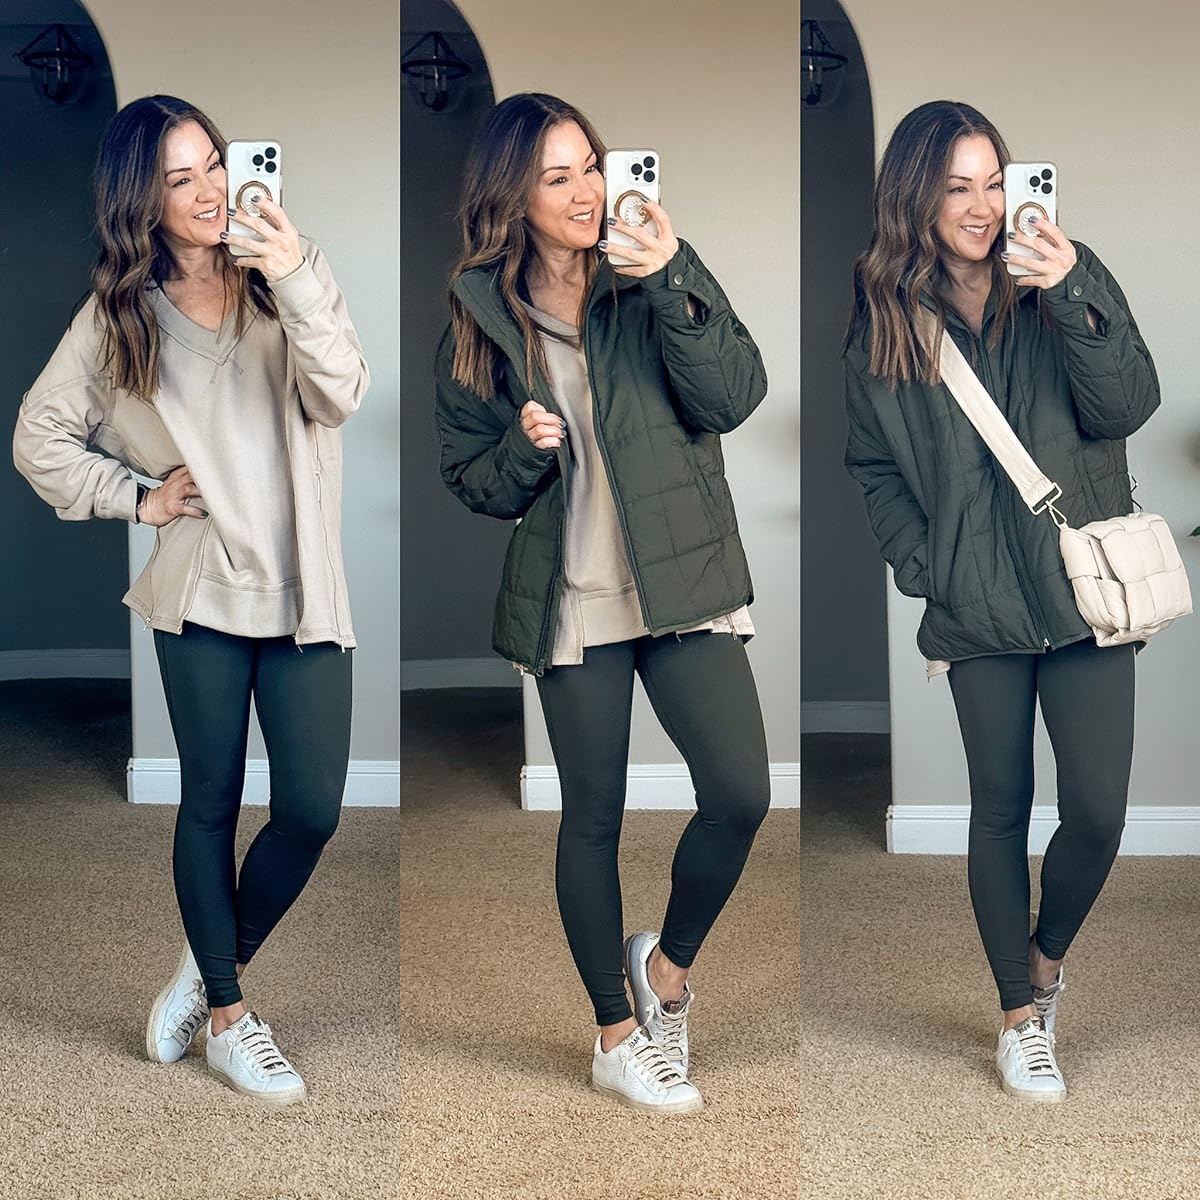 January Top 10 Hottest Best Sellers | January, top 10, best sellers, monthly best sellers, Amazon, v-neck sweater, oversized sweater, jacket, puffer jacket, quilted jacket, leggings, sneakers, puffer purse, everyday outfit